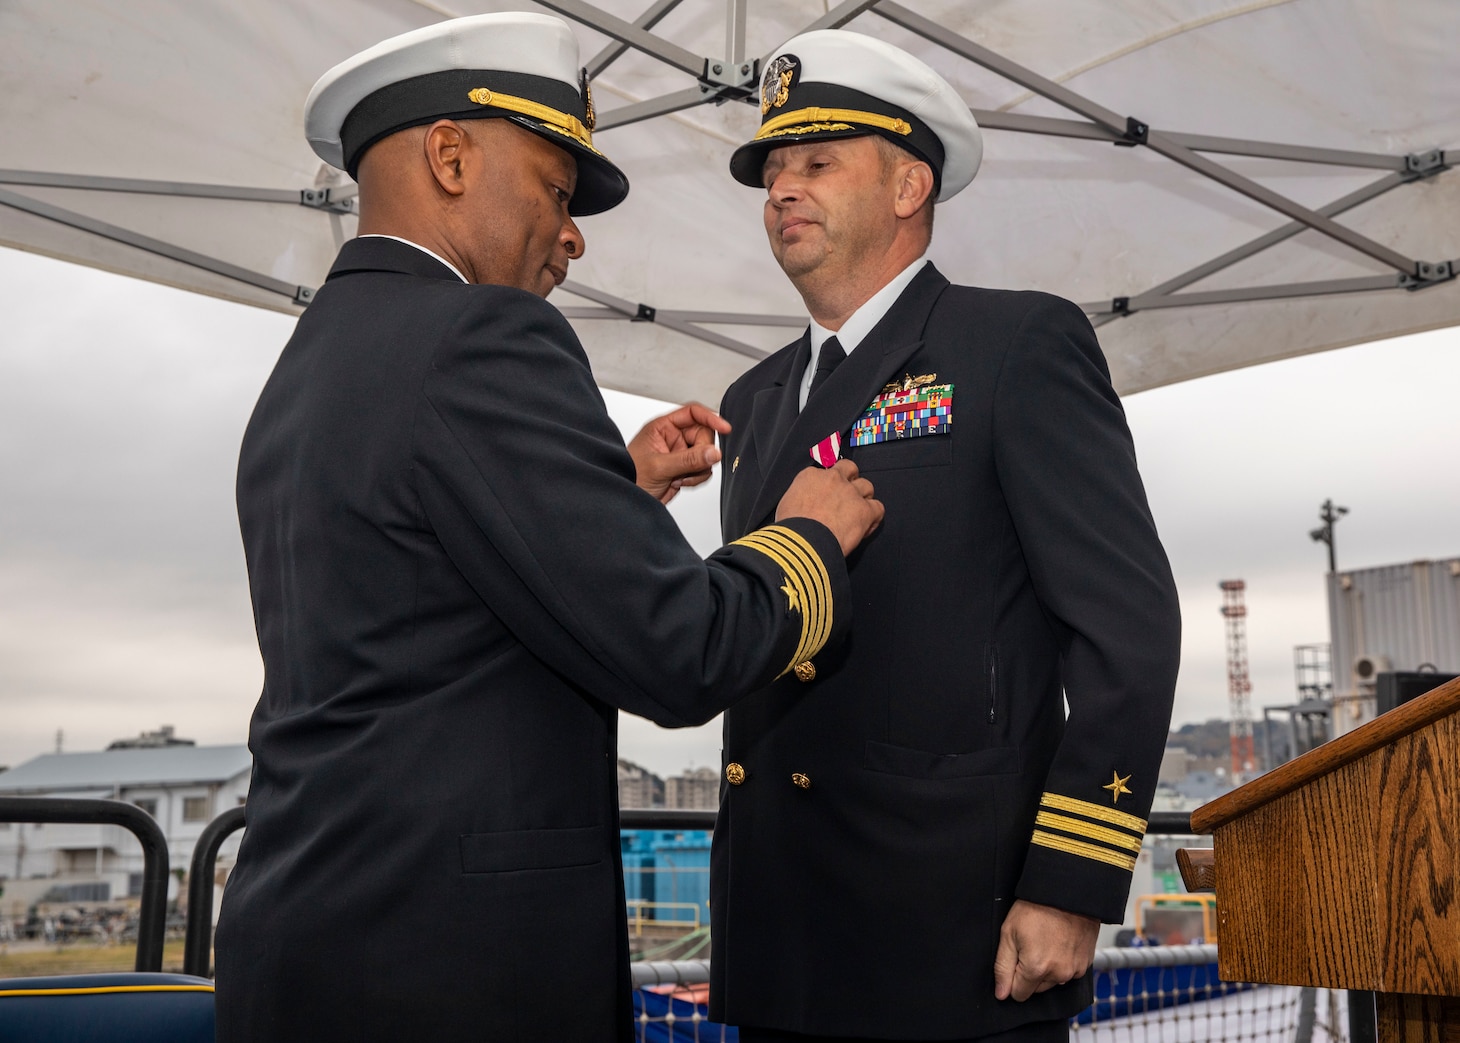 YOKOSUKA, Japan (Dec. 1, 2022) Capt. Walter Mainor, Commander, Task Force 71, presents a Meritorious Service Medal to Cmdr. Travis Montplaisir, outgoing commanding officer of Arleigh Burke-class guided-missile destroyer USS Howard (DDG 83), during a change of command ceremony aboard the ship, forward-deployed to Commander, Fleet Activities Yokosuka, Dec. 1. Howard is assigned to Commander, Task Force 71/ Destroyer Squadron (DESRON) 15, the Navy’s largest forward-deployed DESRON and the U.S. 7th fleet’s principal surface force. (U.S. Navy photo by Mass Communication Specialist 3rd Class Santiago Navarro)